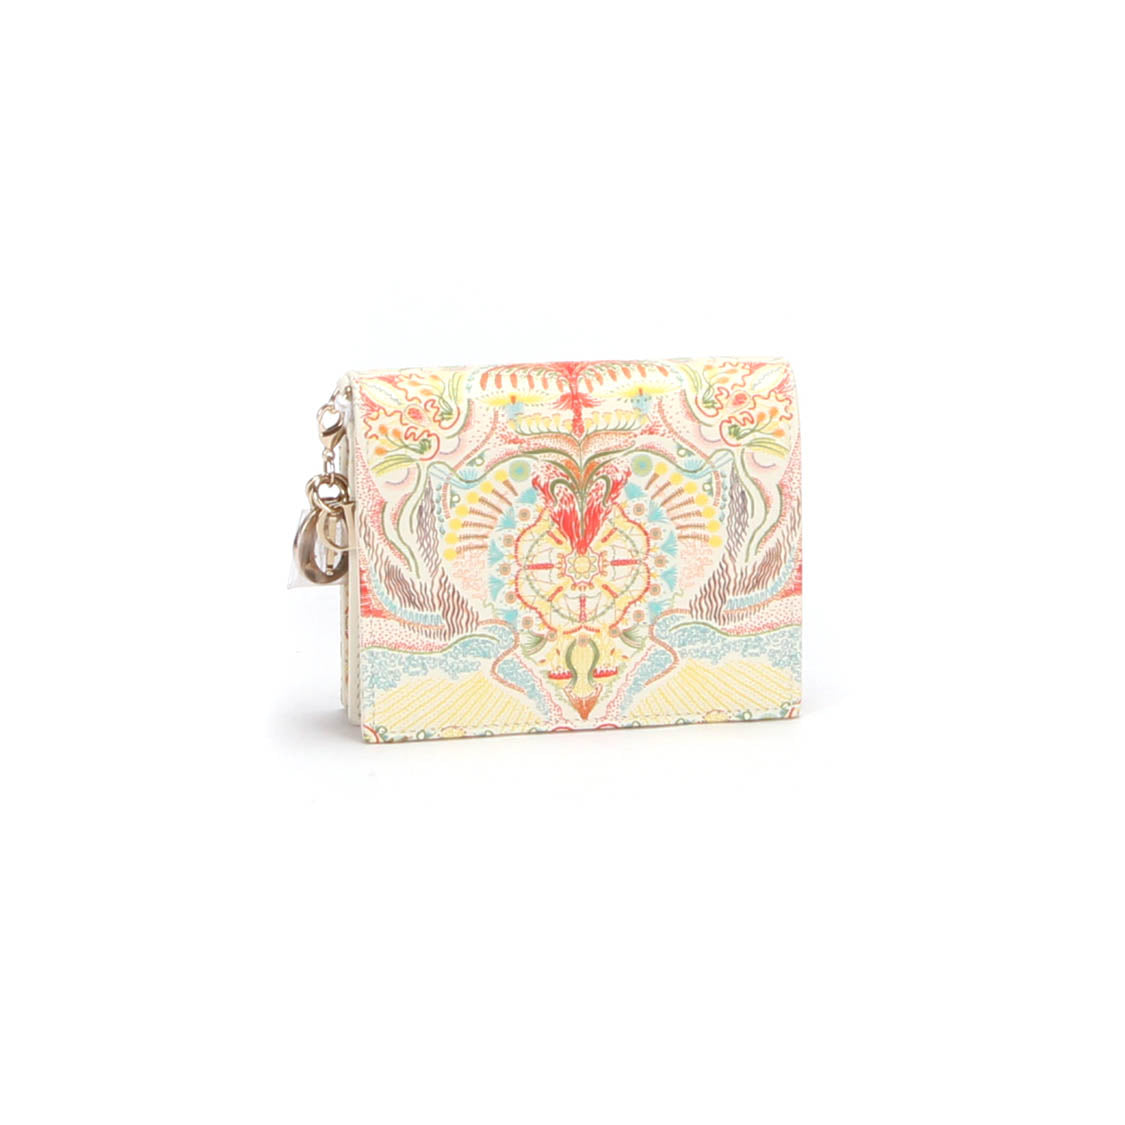 Lady Dior Printed Leather Wallet